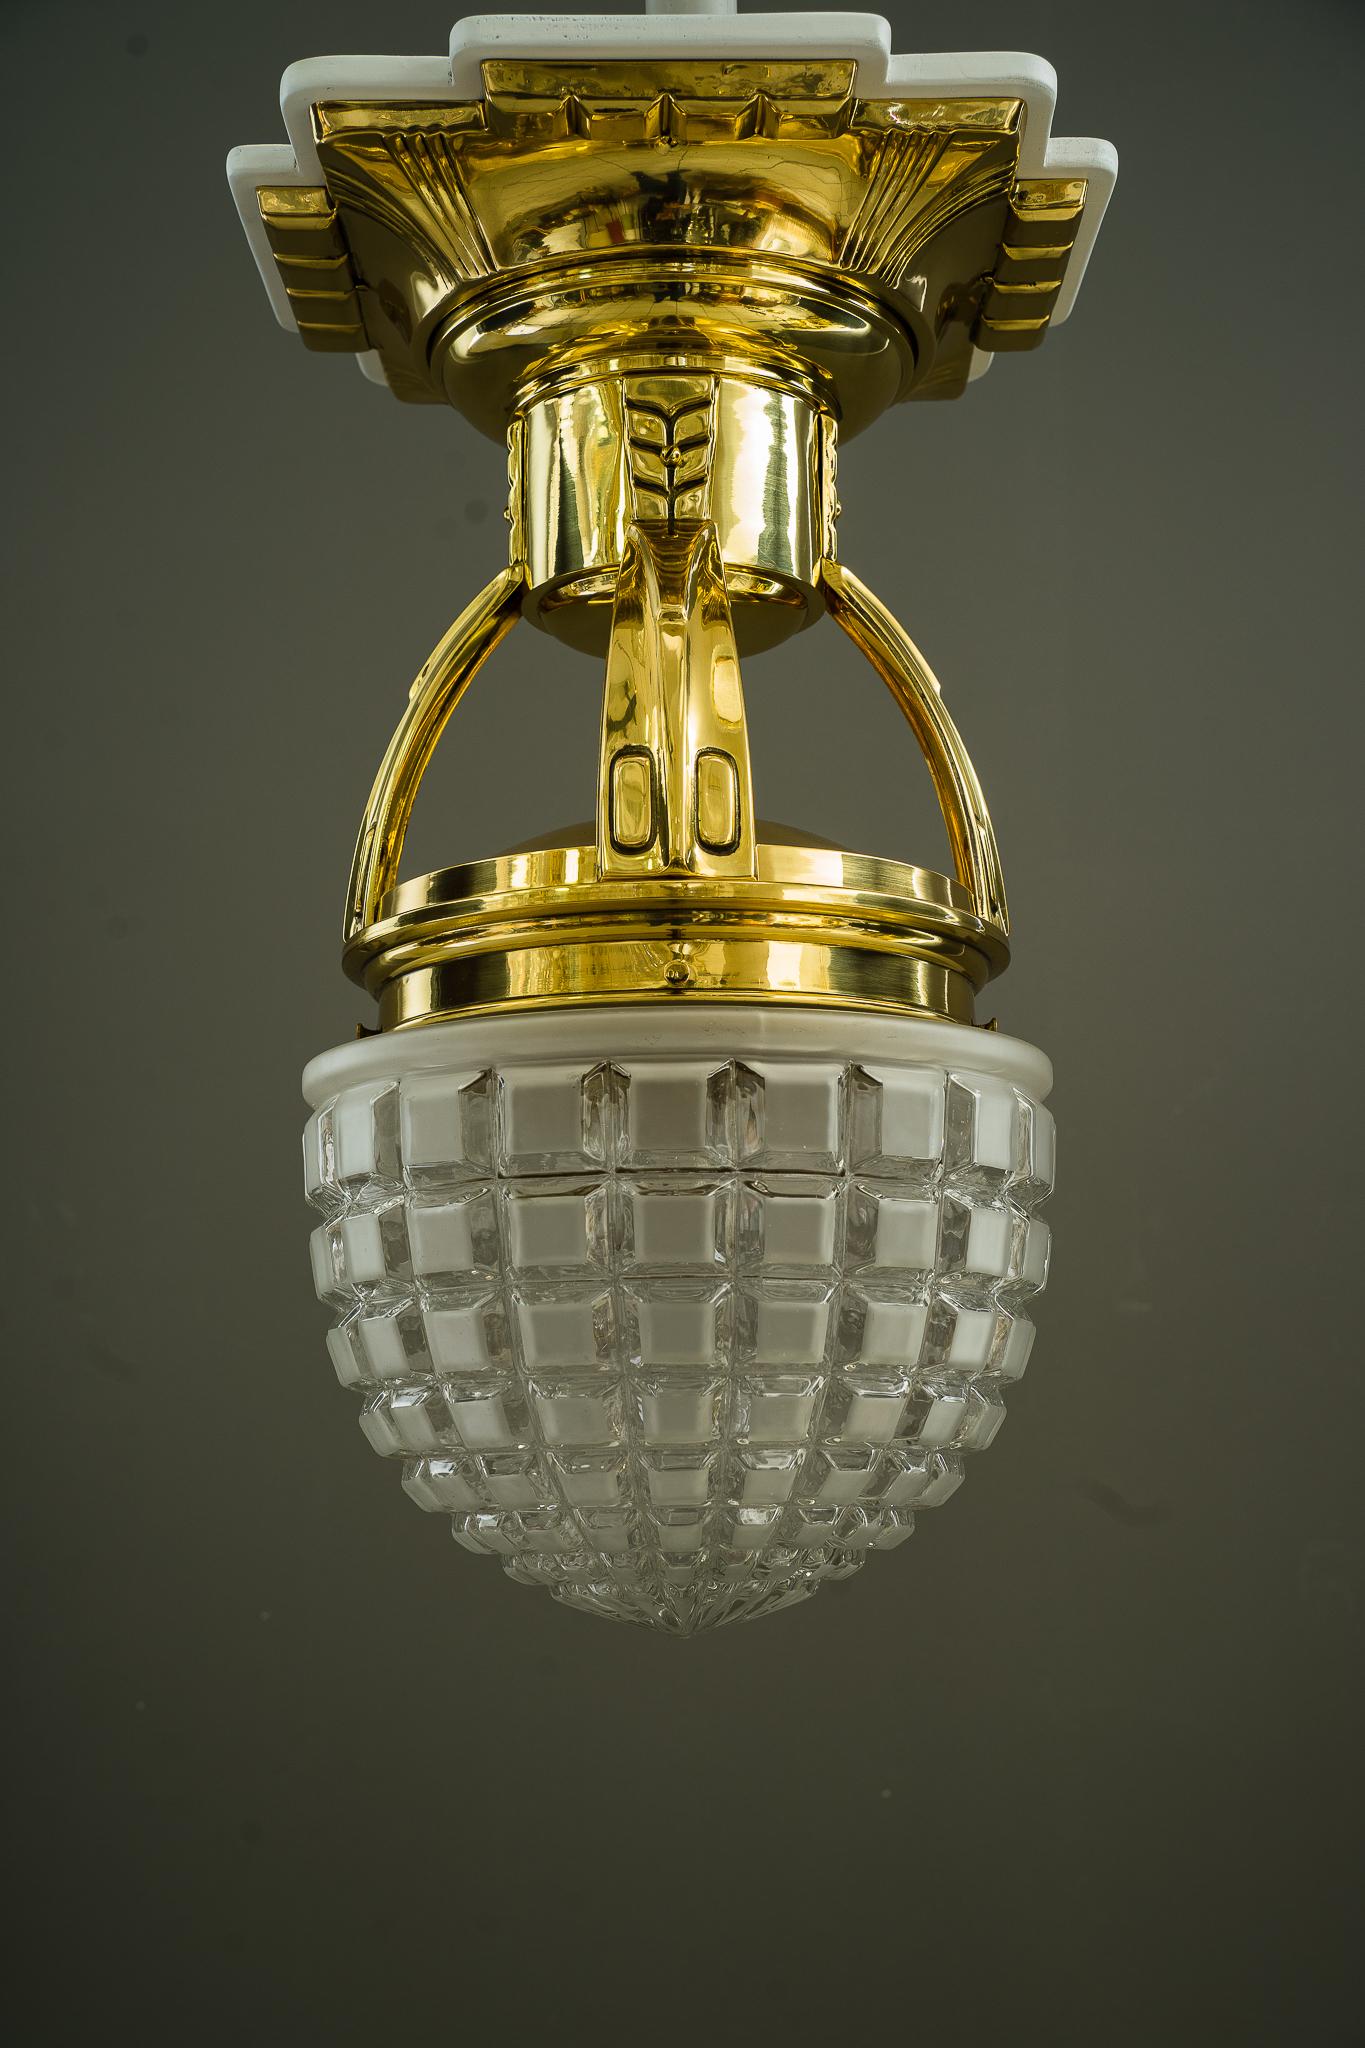 Big Art Deco ceiling lamp Vienna around 1920s.
Brass polished and stove enameled.
Original glass shade.
Wood plate white painted on top (new wood plate).